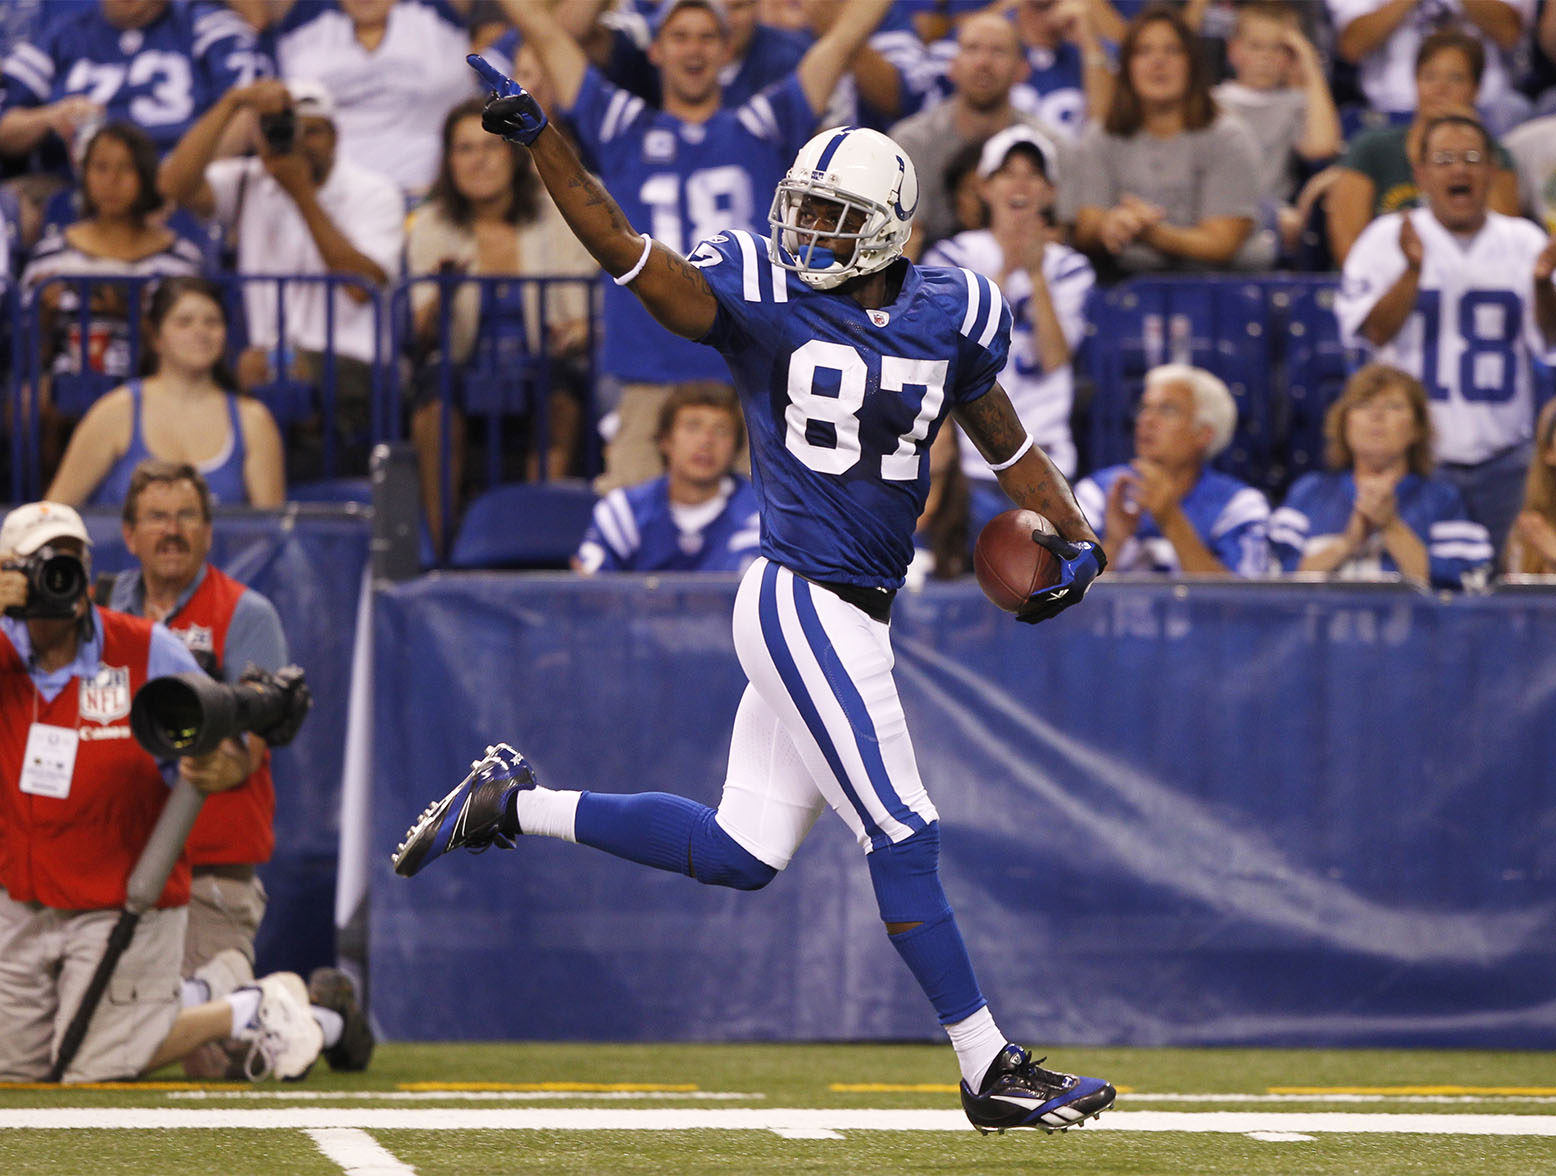 INDIANAPOLIS, IN - AUGUST 26: Reggie Wayne #87 of the Indianapolis Colts runs down the sideline on a 57-yard touchdown reception during the first half of an NFL preseason game against the Green Bay Packers at Lucas Oil Stadium on August 26, 2011 in Indianapolis, Indiana. (Photo by Joe Robbins/Getty Images)